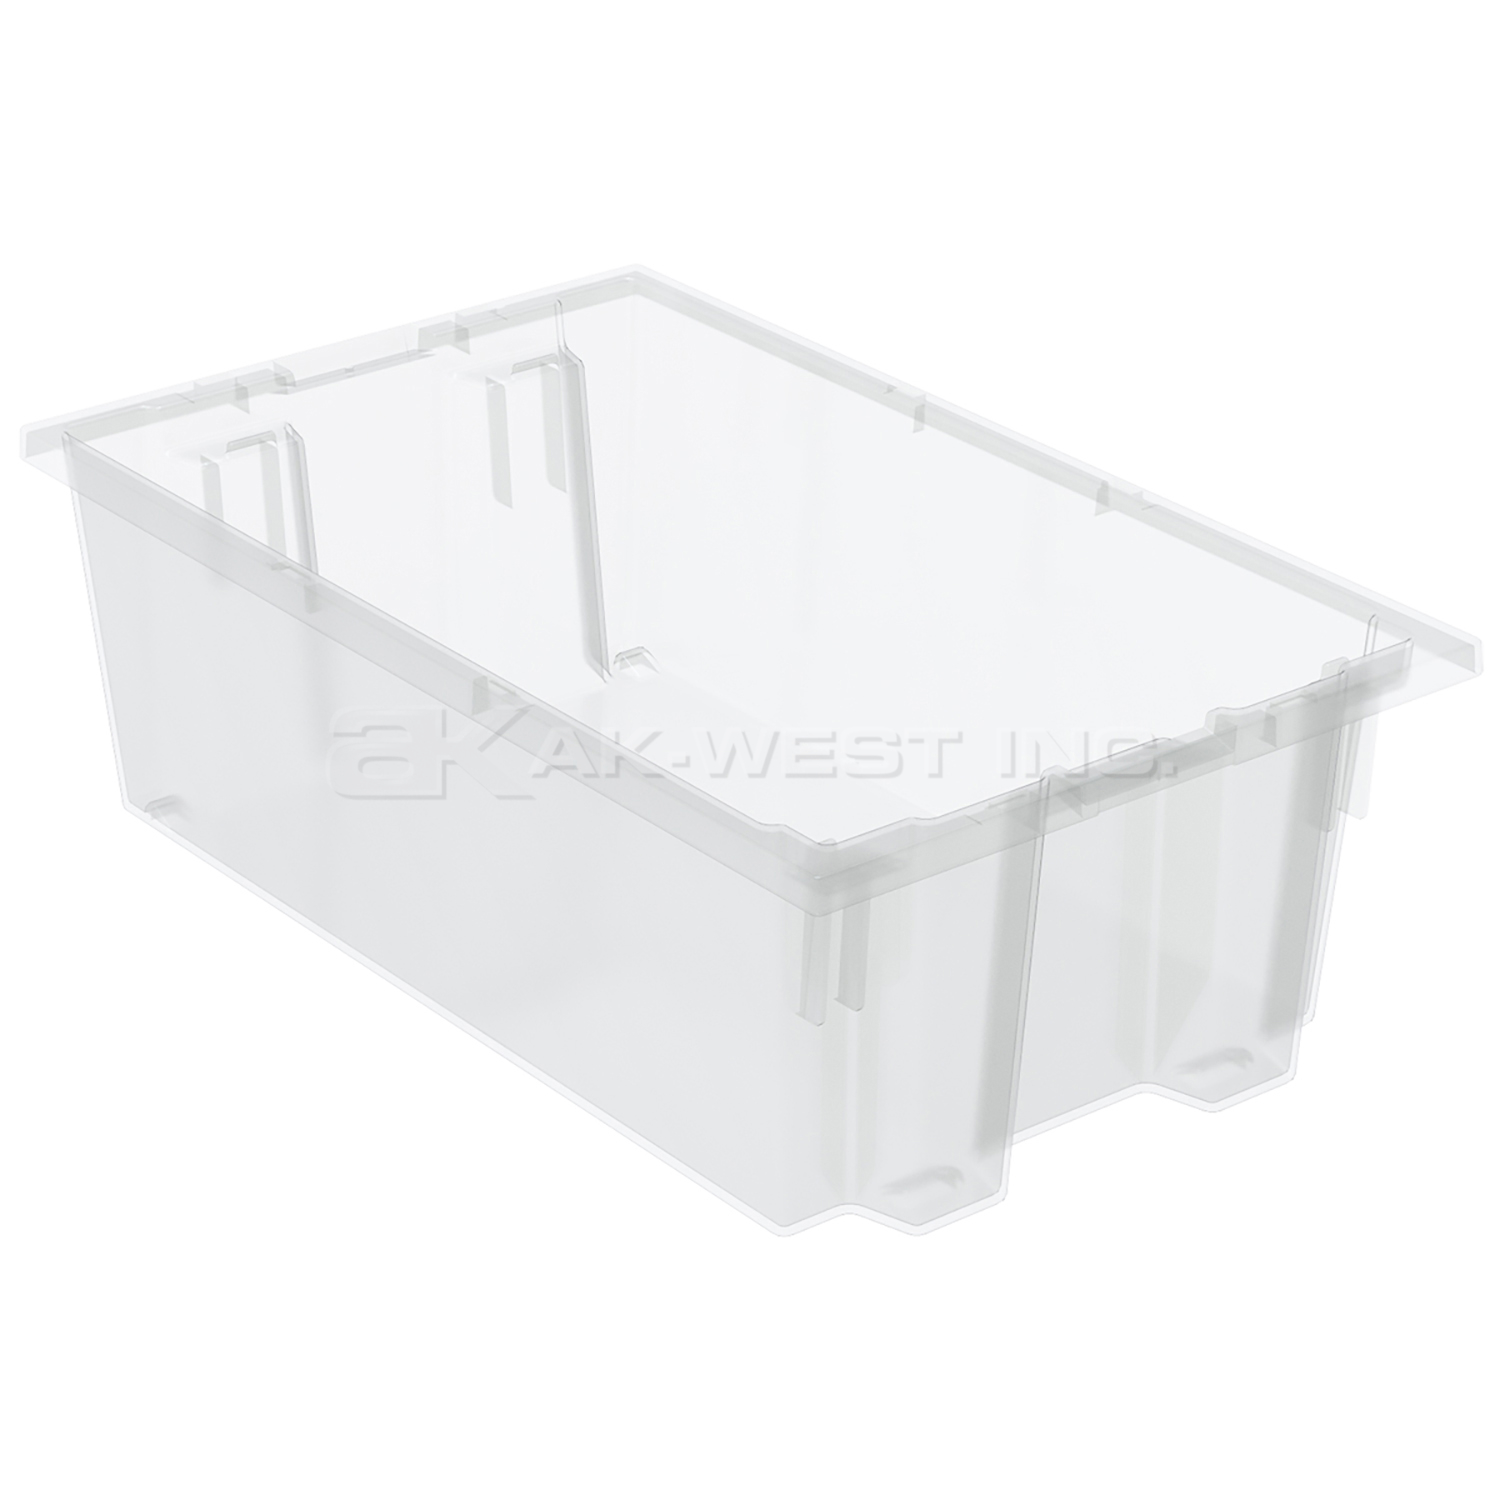 Clear, 18" x 11" x 6" Nest and Stack Tote (6 Per Carton)